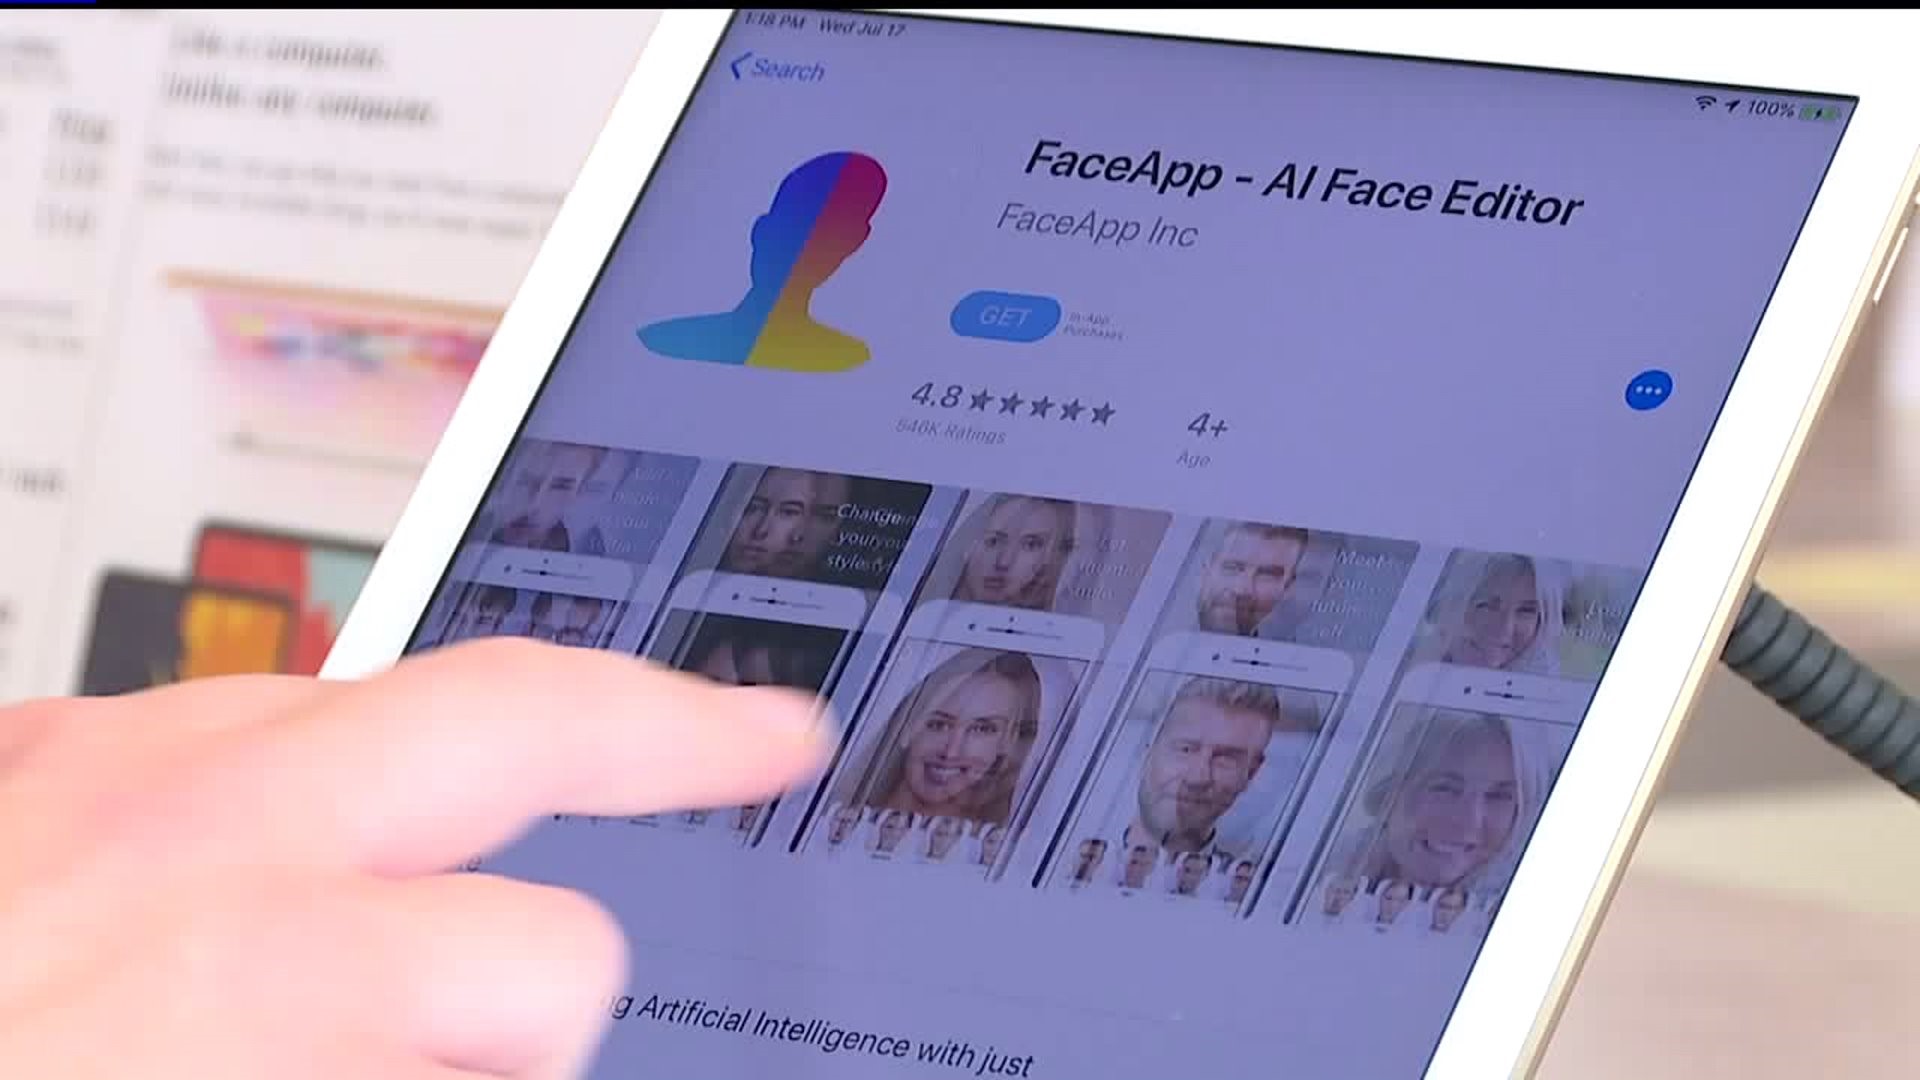 DNC warns candidates of Russia-based FaceApp; developers issue statement